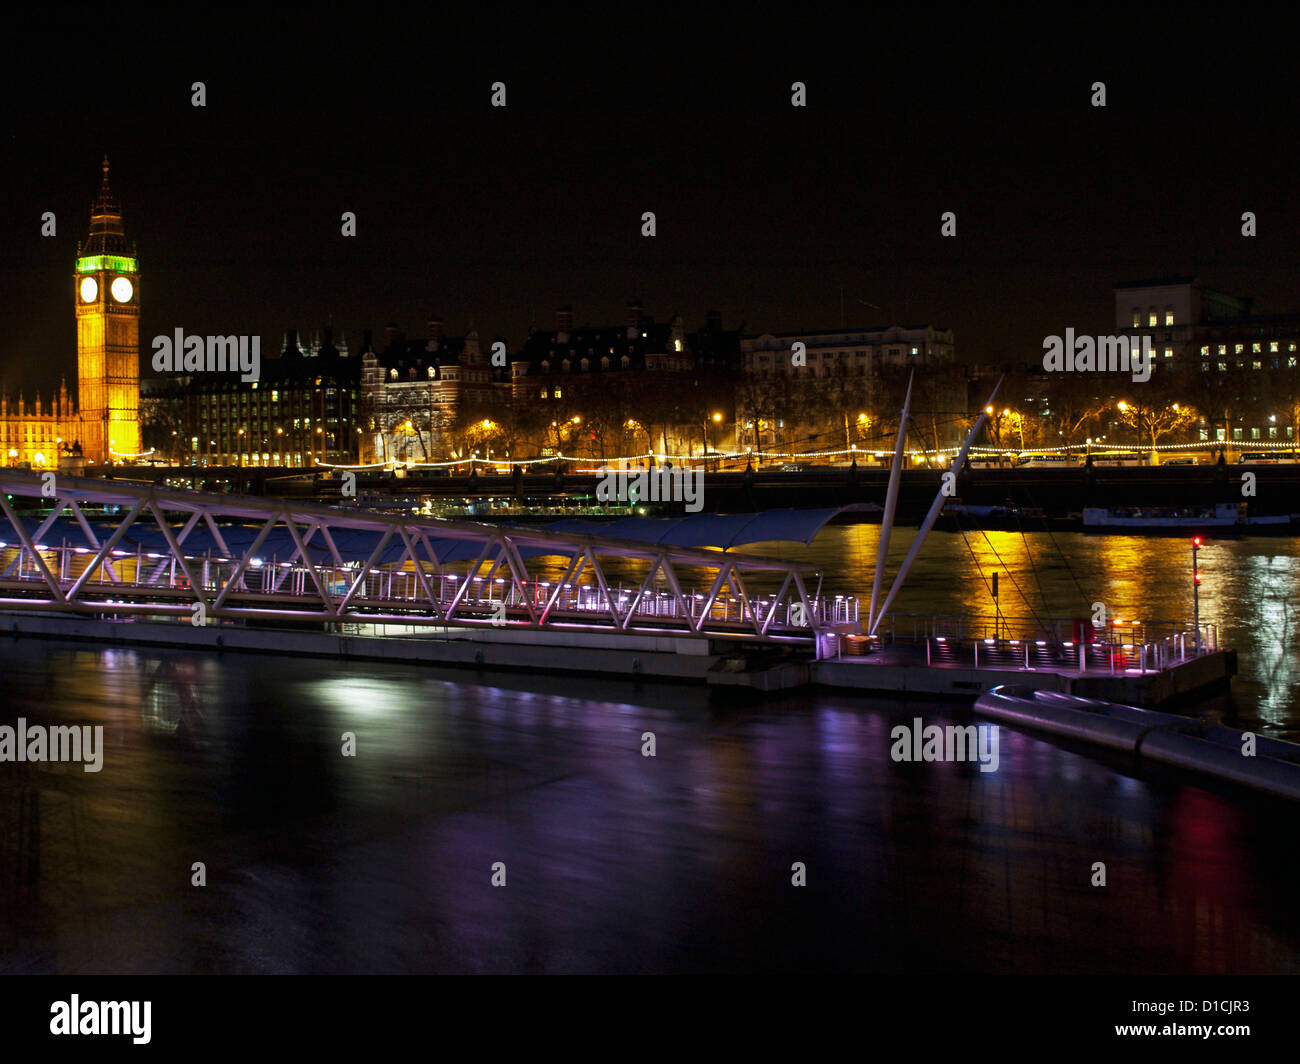 View of River Thames, Embankment, Big Ben clock tower, UNESCO World Heritage Site, City of Westminster, London, England, UK Stock Photo